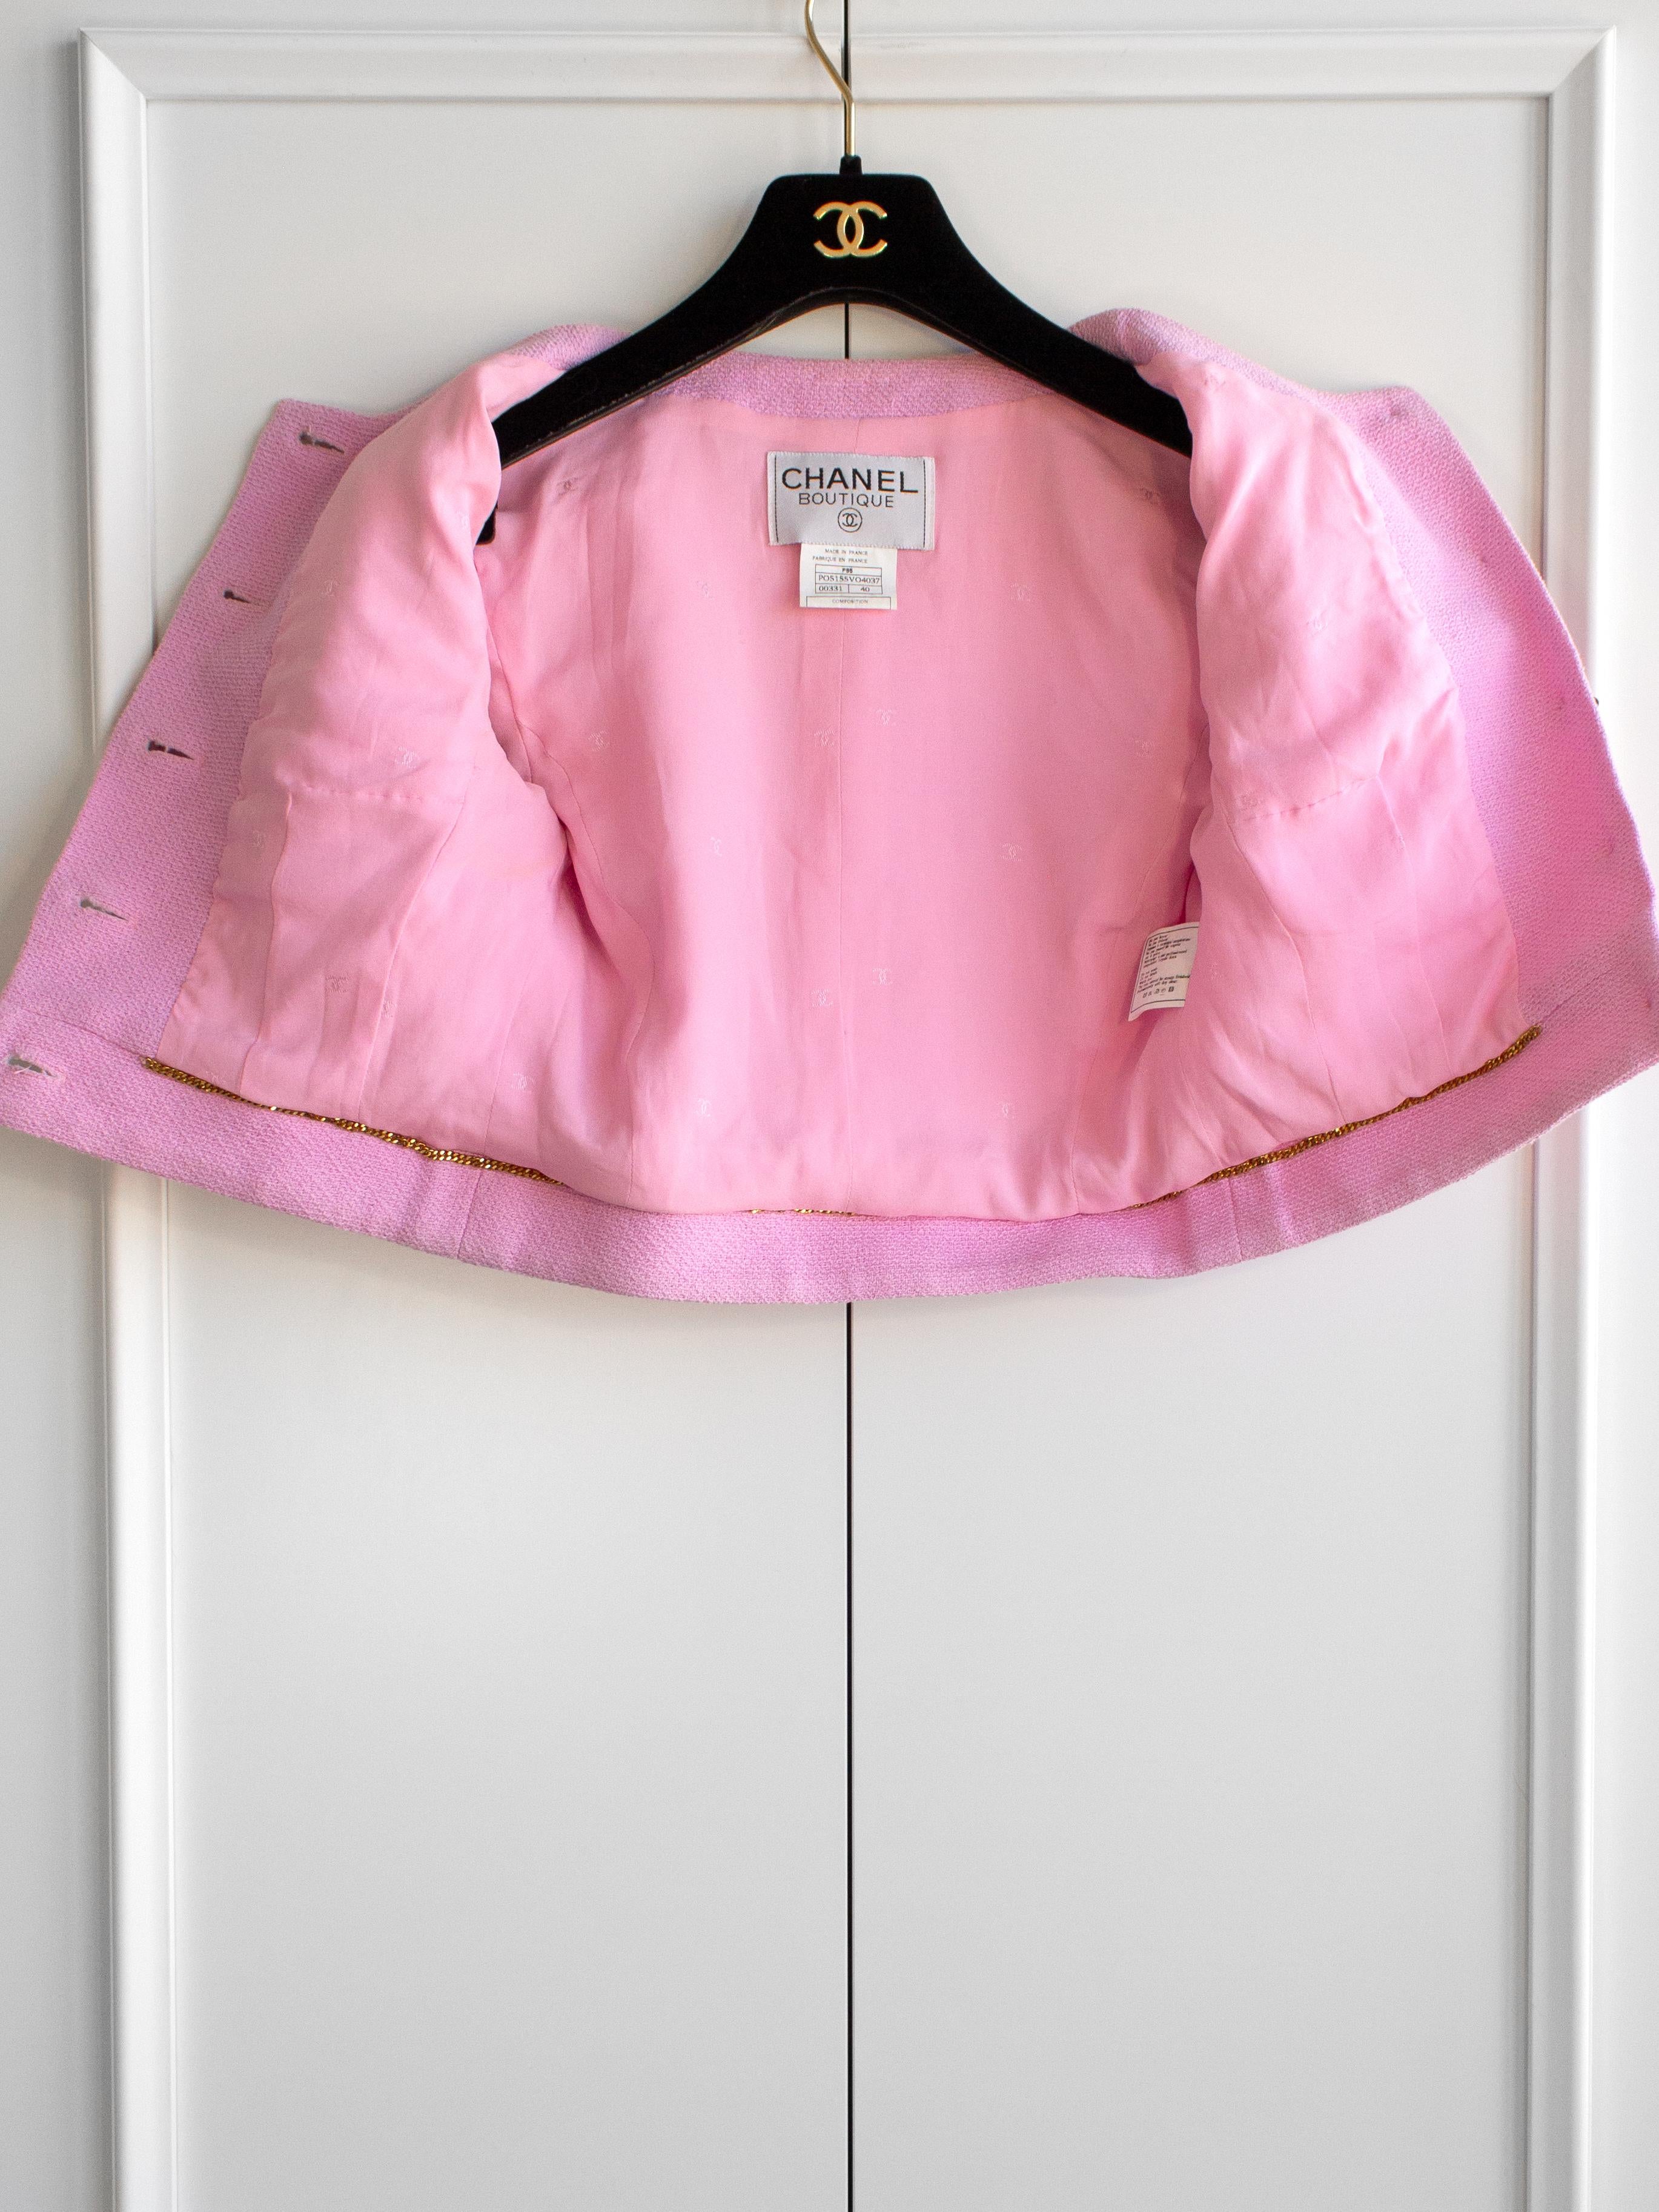 Iconic Chanel Vintage S/S 1995 Barbie Cropped Pink Black 95P Jacket Corset Skirt 9